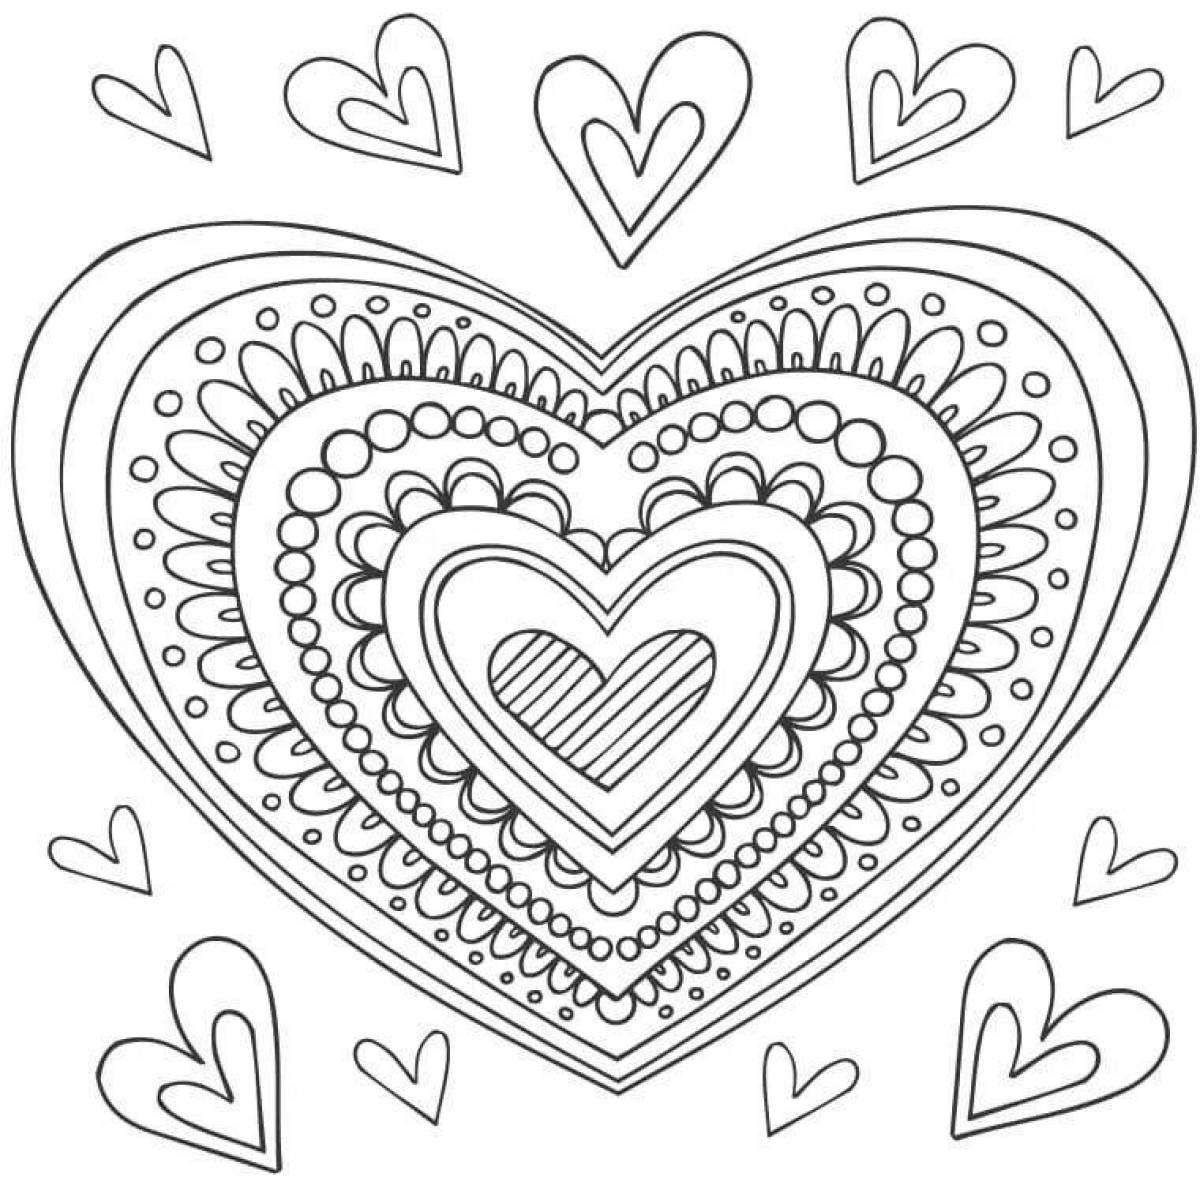 Cheerful heart antistress coloring book